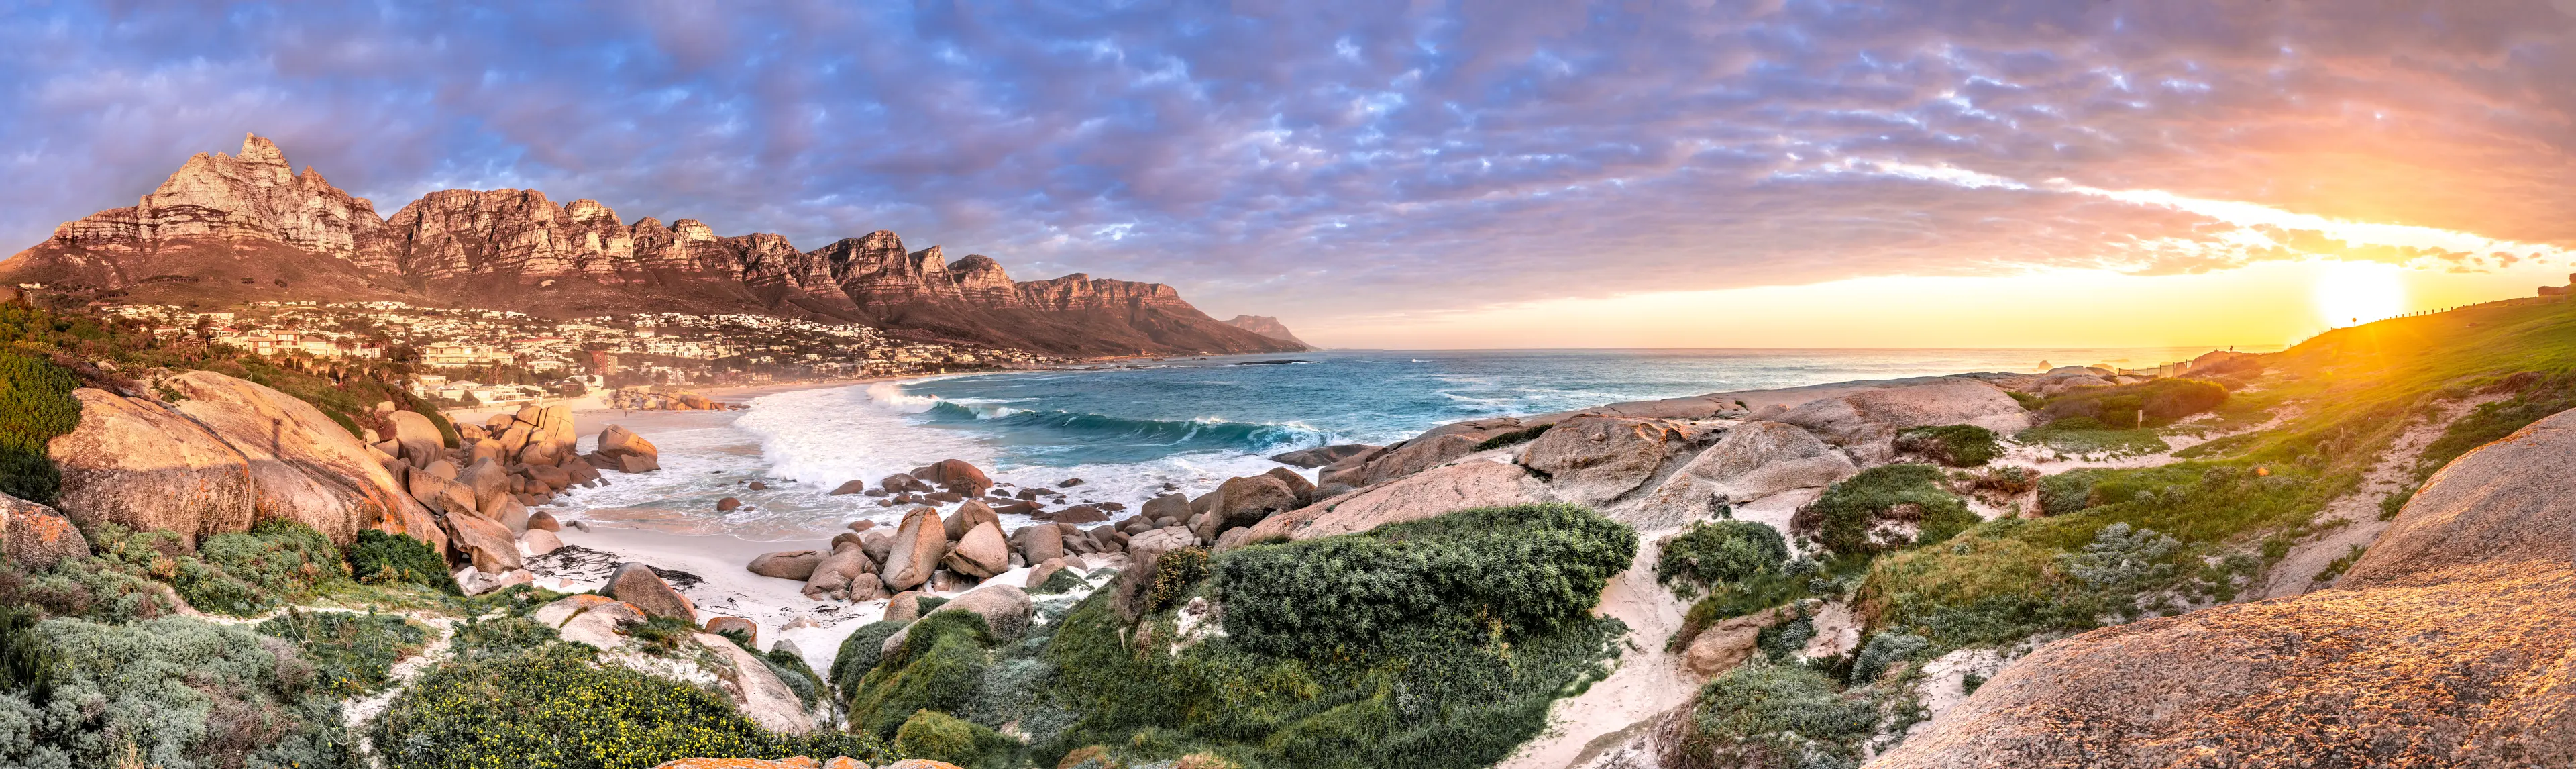 2-Day Cape Town Adventure: Outdoor Activities & Nightlife with Friends